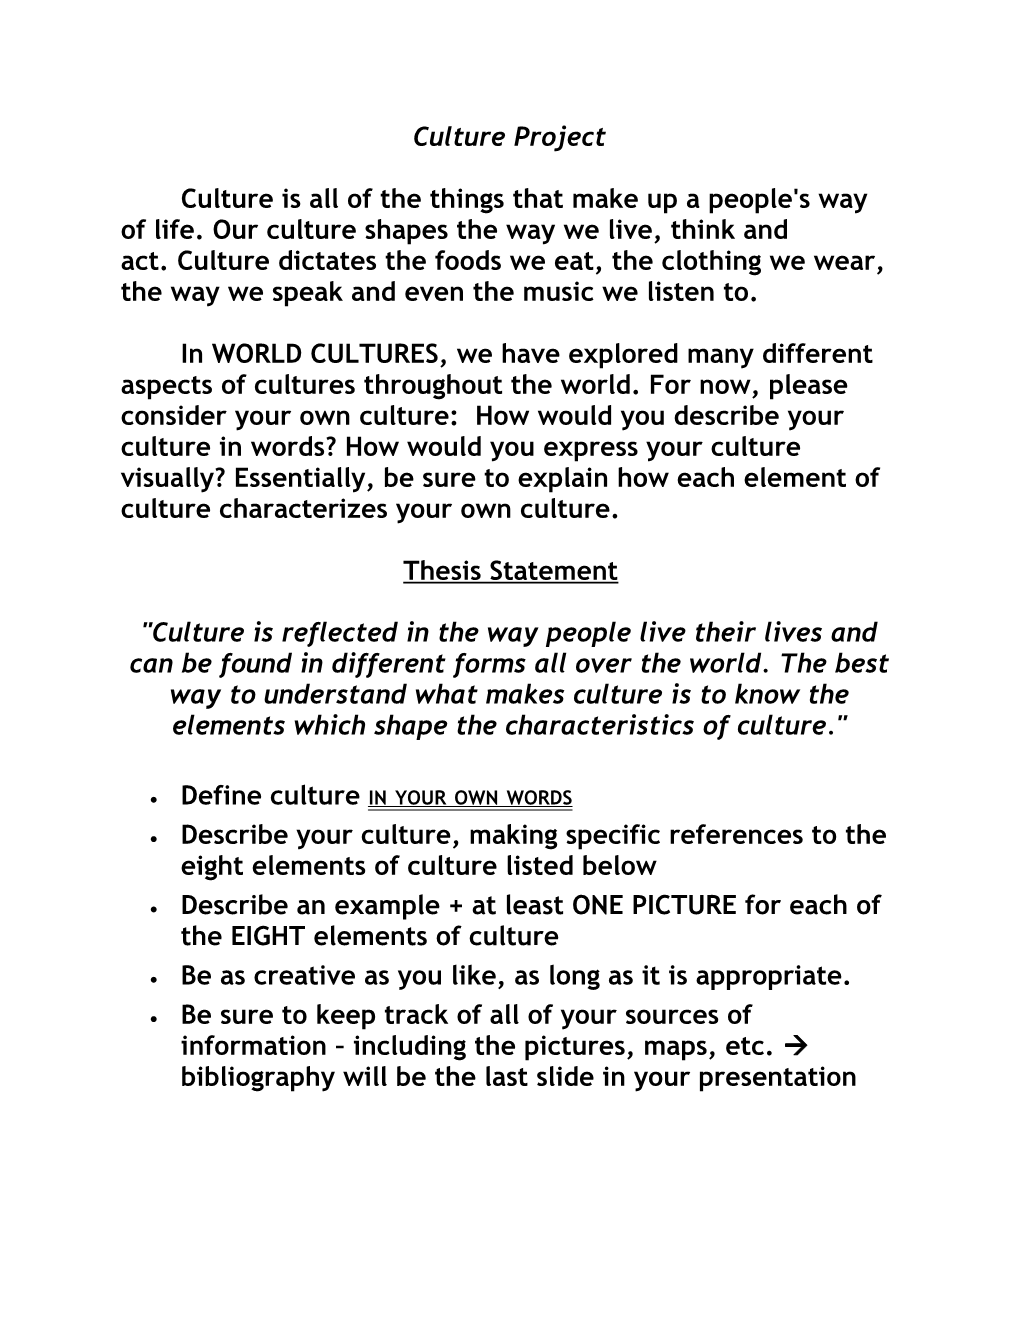 Culture Is All of the Things That Make up a People's Way of Life.Our Culture Shapes The